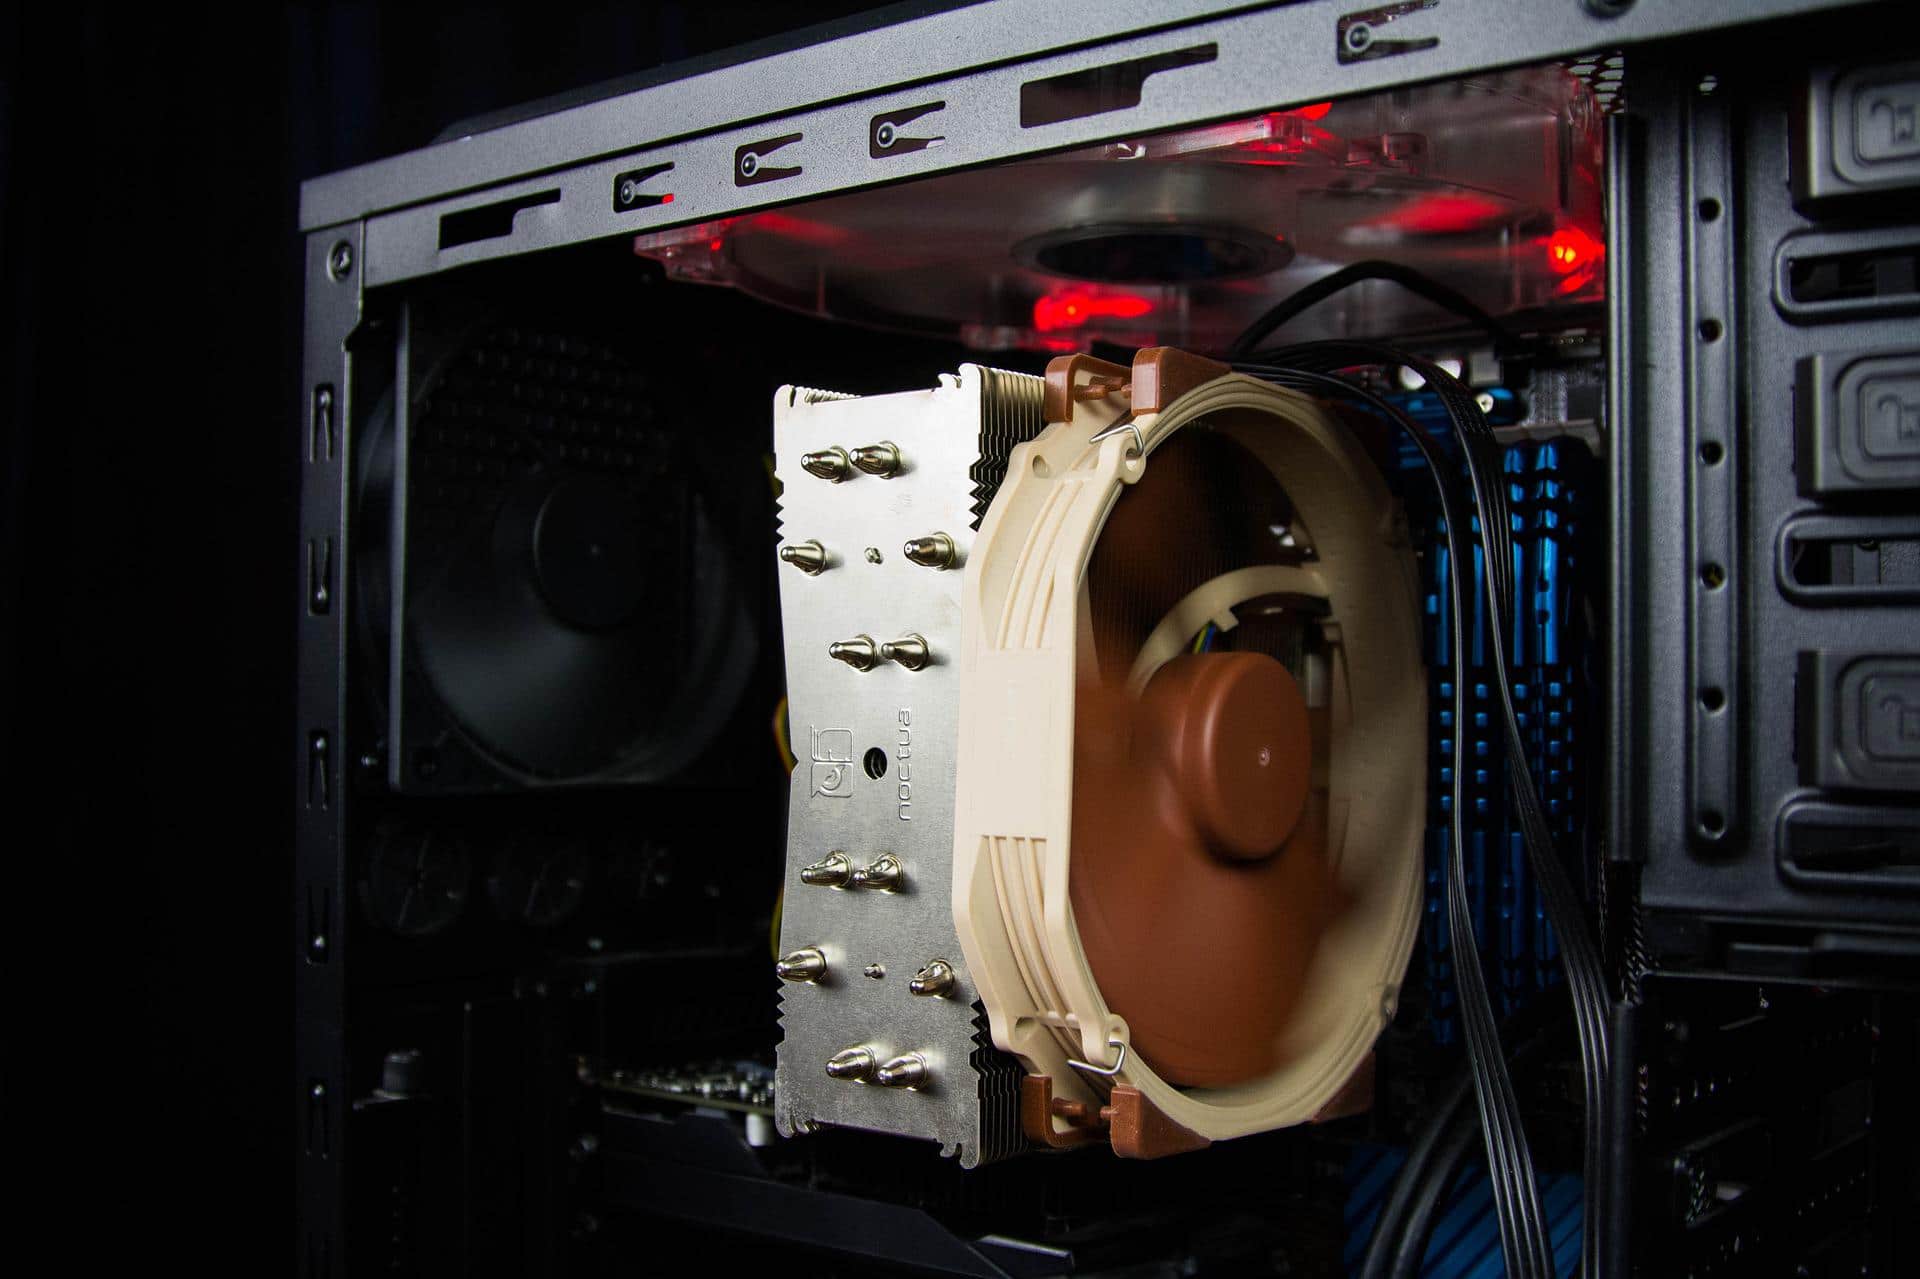 Check for dust buildup: Overheating can occur due to dust buildup in the computer's vents and fans. Clean them regularly with compressed air.
Run a temperature monitoring software: Use a software like HWMonitor or SpeedFan to keep an eye on the temperature of your CPU and GPU.